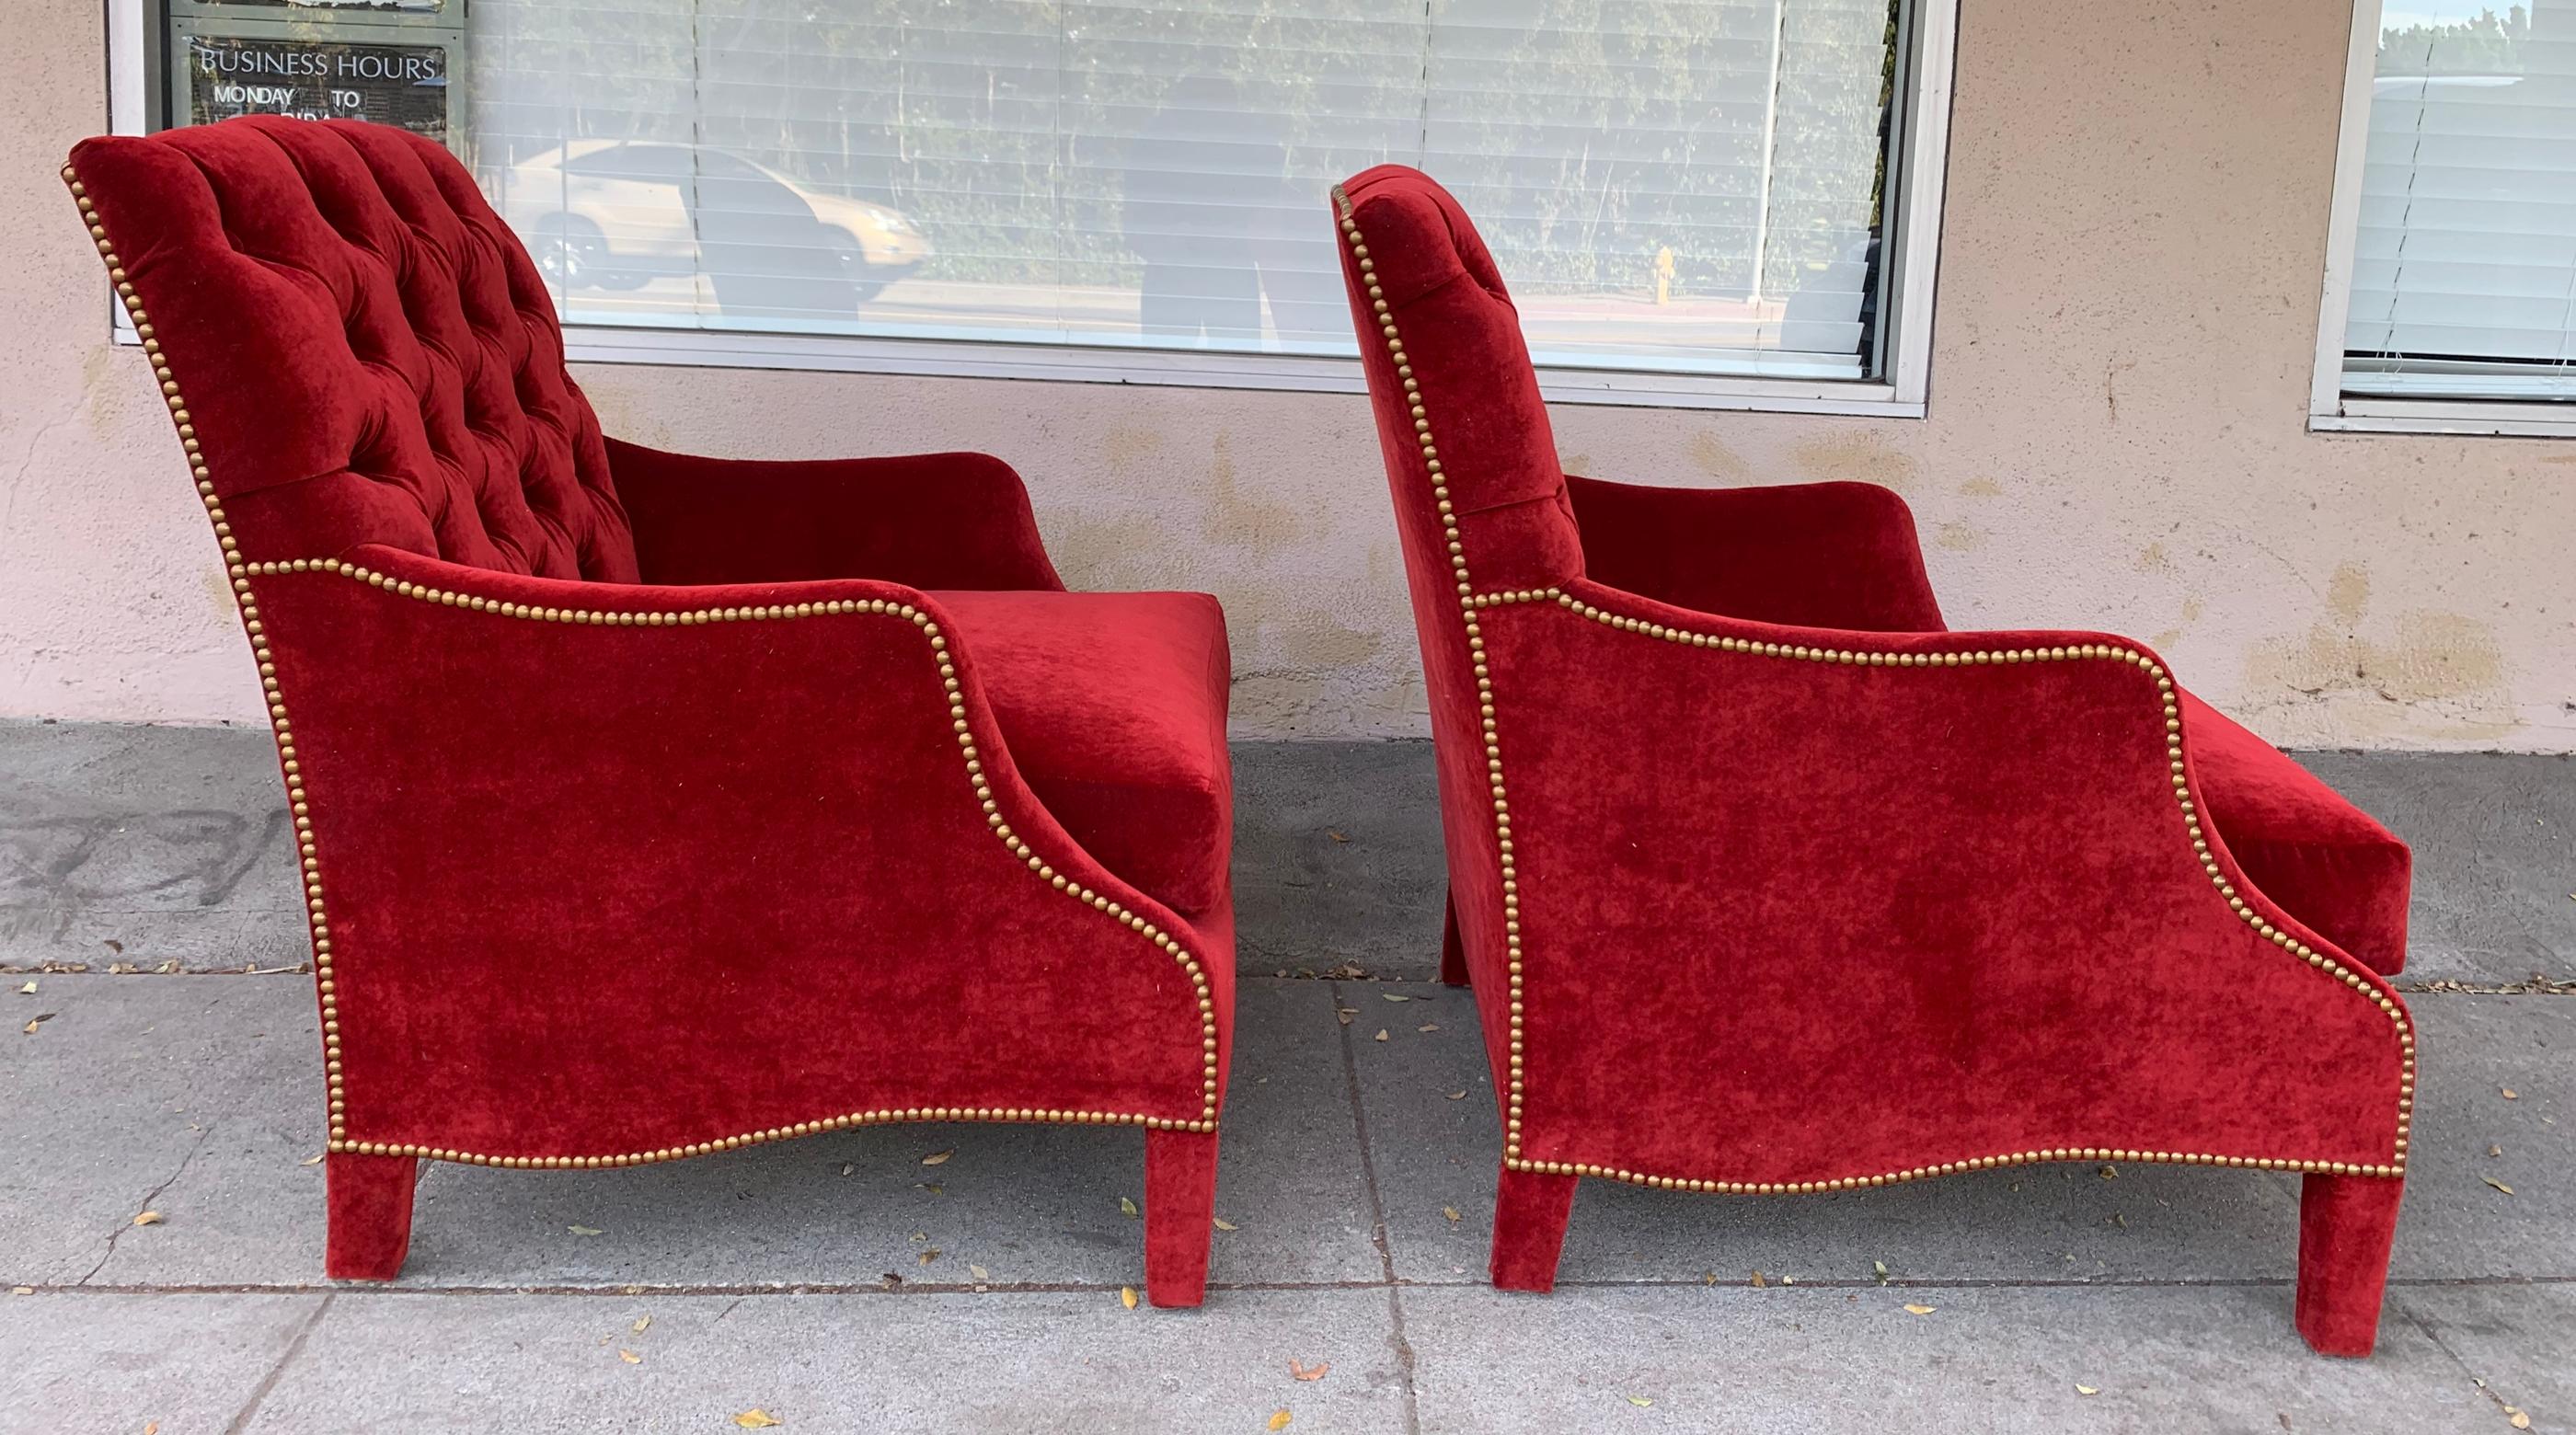 Modern Pair of English Style Armchairs with Tufted Backs, Upholstered in Red Velvet